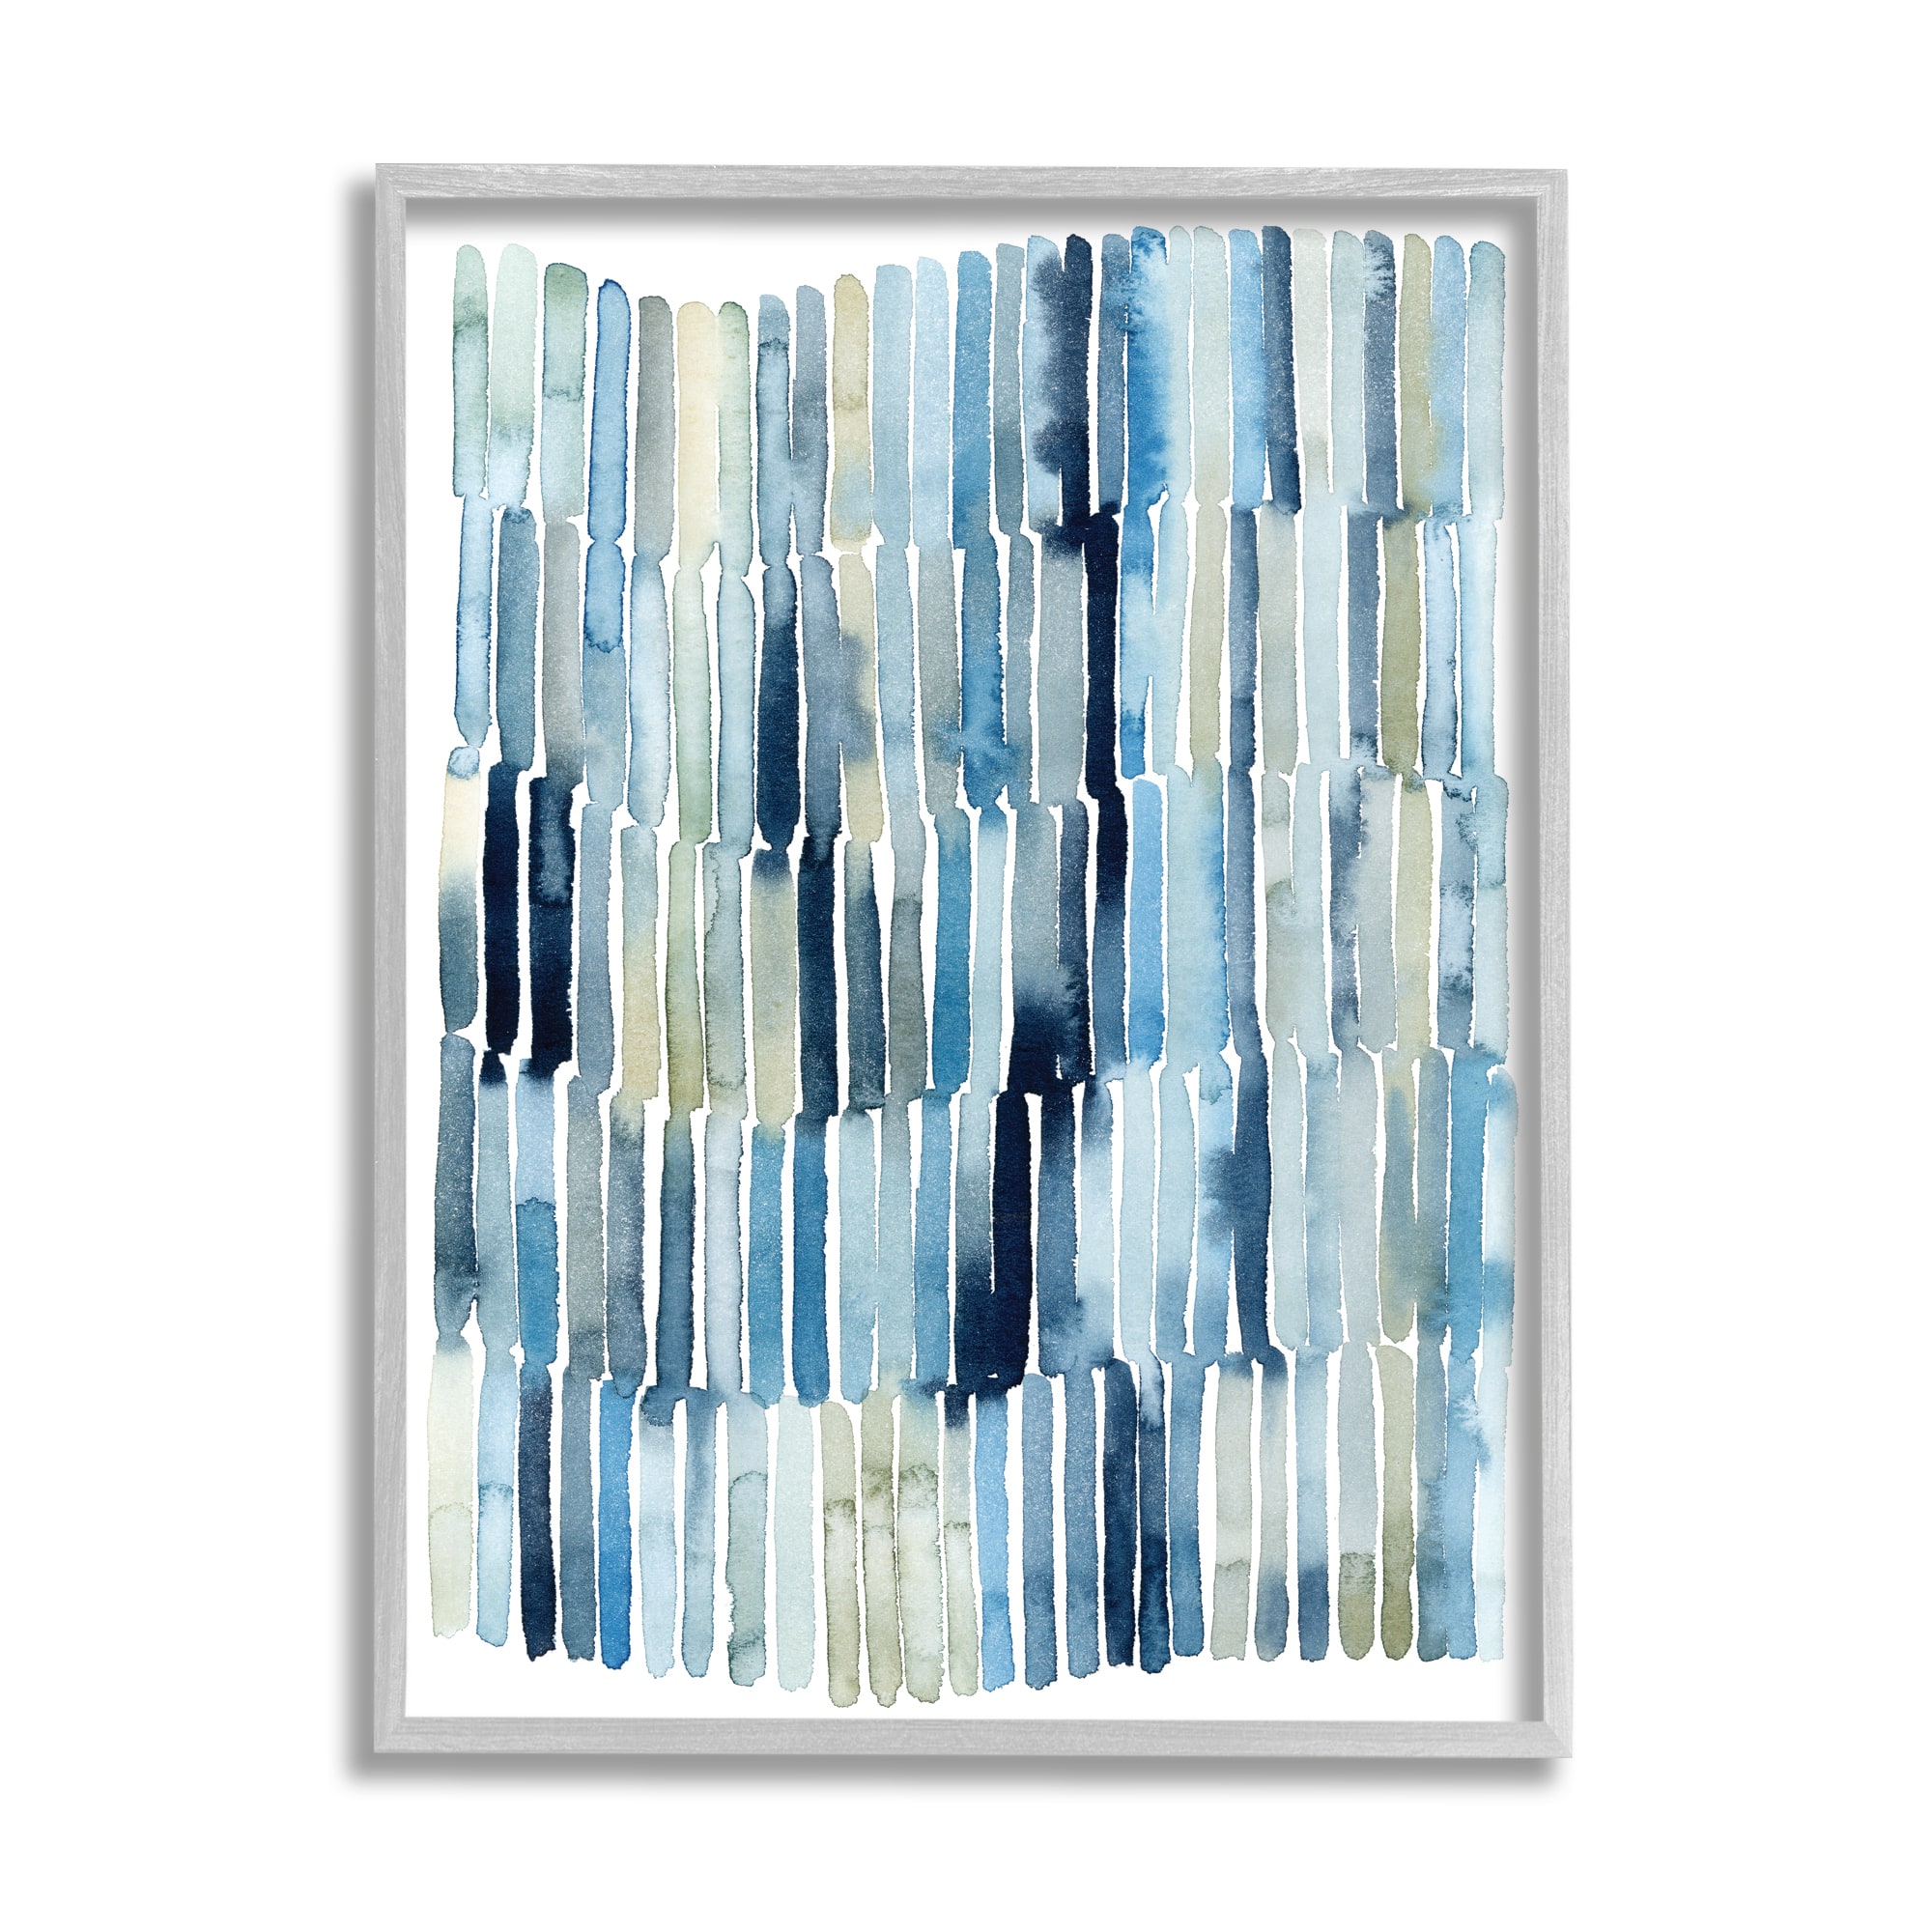 Stupell Industries Nautical Inspired Abstraction Blue Beige Blocked Lines in Gray Frame Wall Art